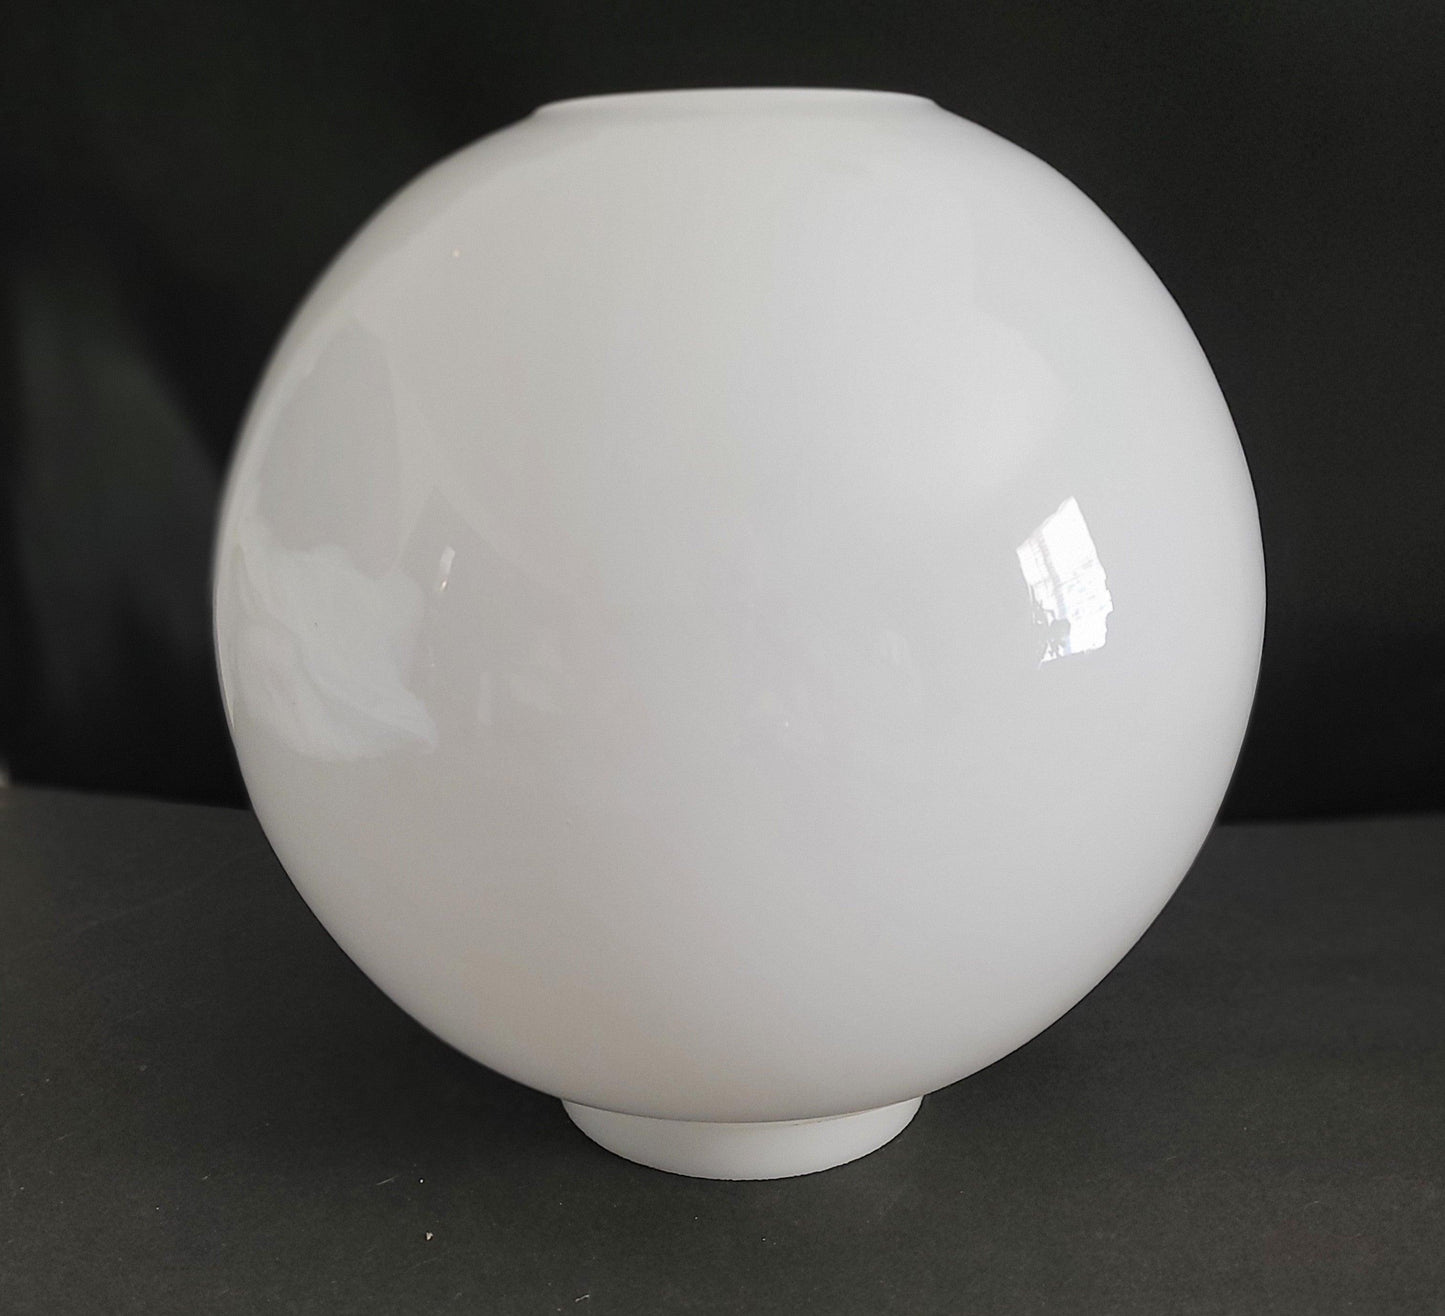 62374 White Opal Ball | 3 sizes - Specialty Shades